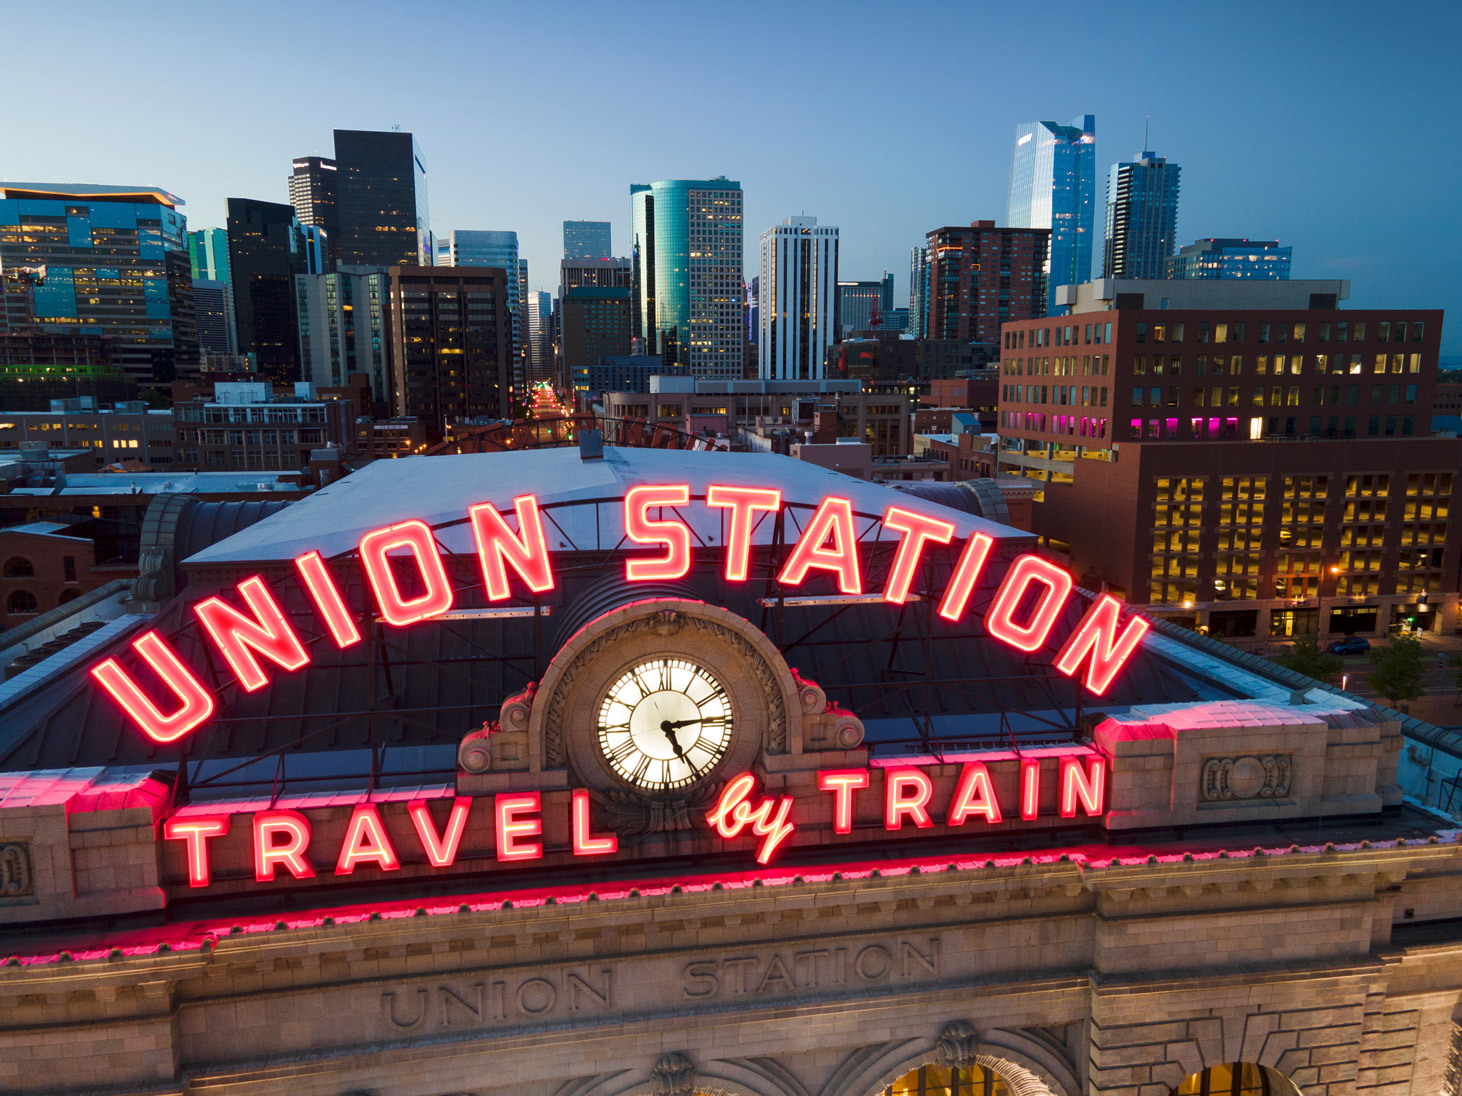 Union Station in evening with neon sign that says travel by train, Denver city skyline behind it